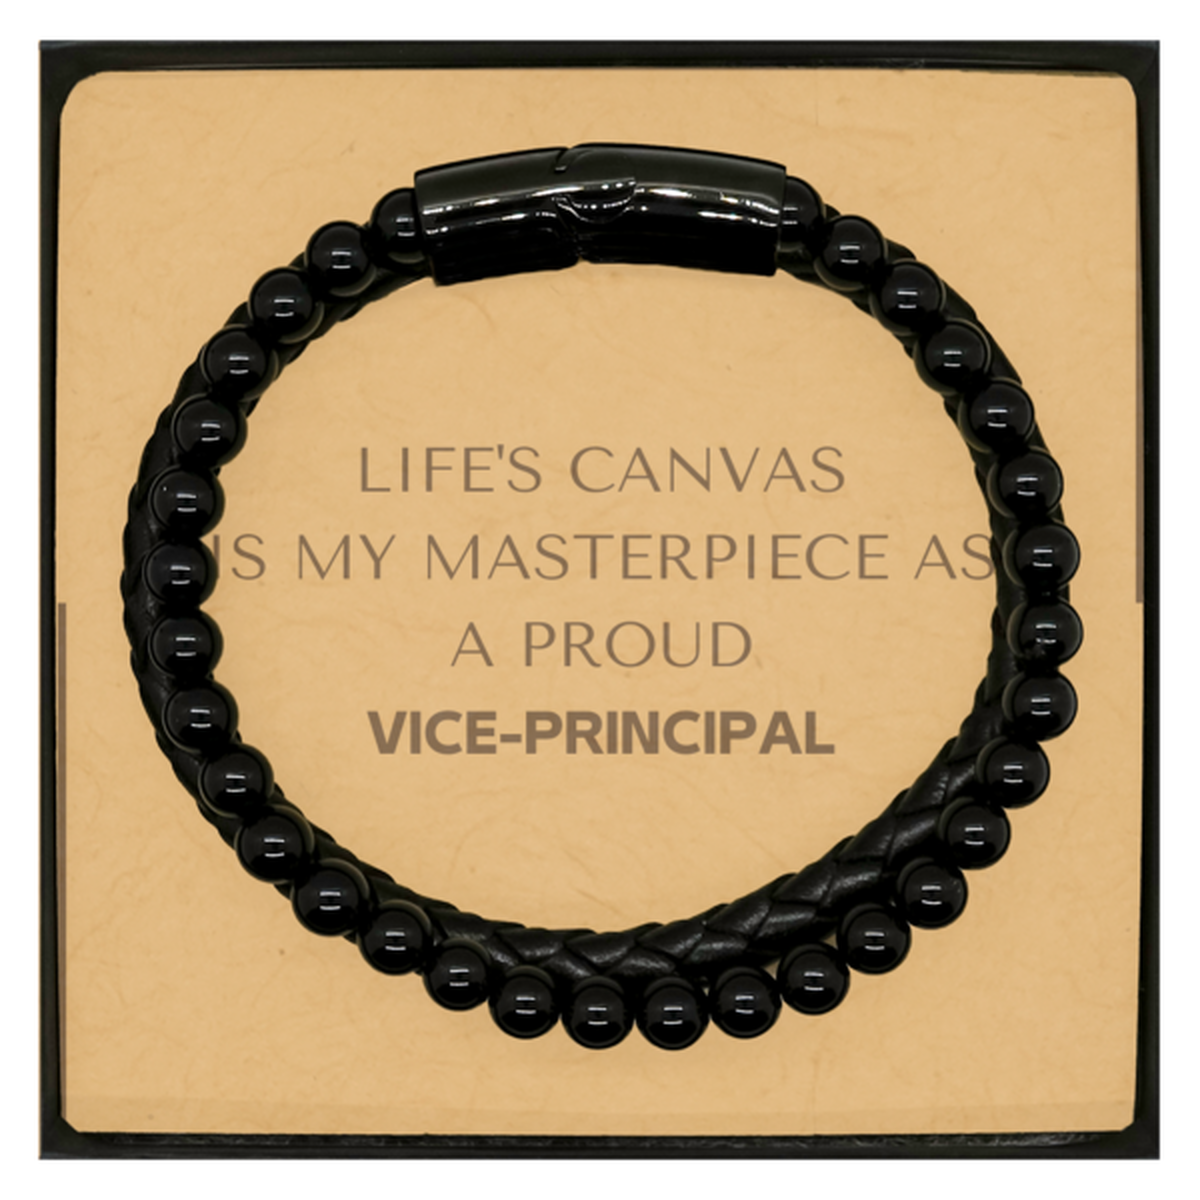 Proud Vice-principal Gifts, Life's canvas is my masterpiece, Epic Birthday Christmas Unique Stone Leather Bracelets For Vice-principal, Coworkers, Men, Women, Friends